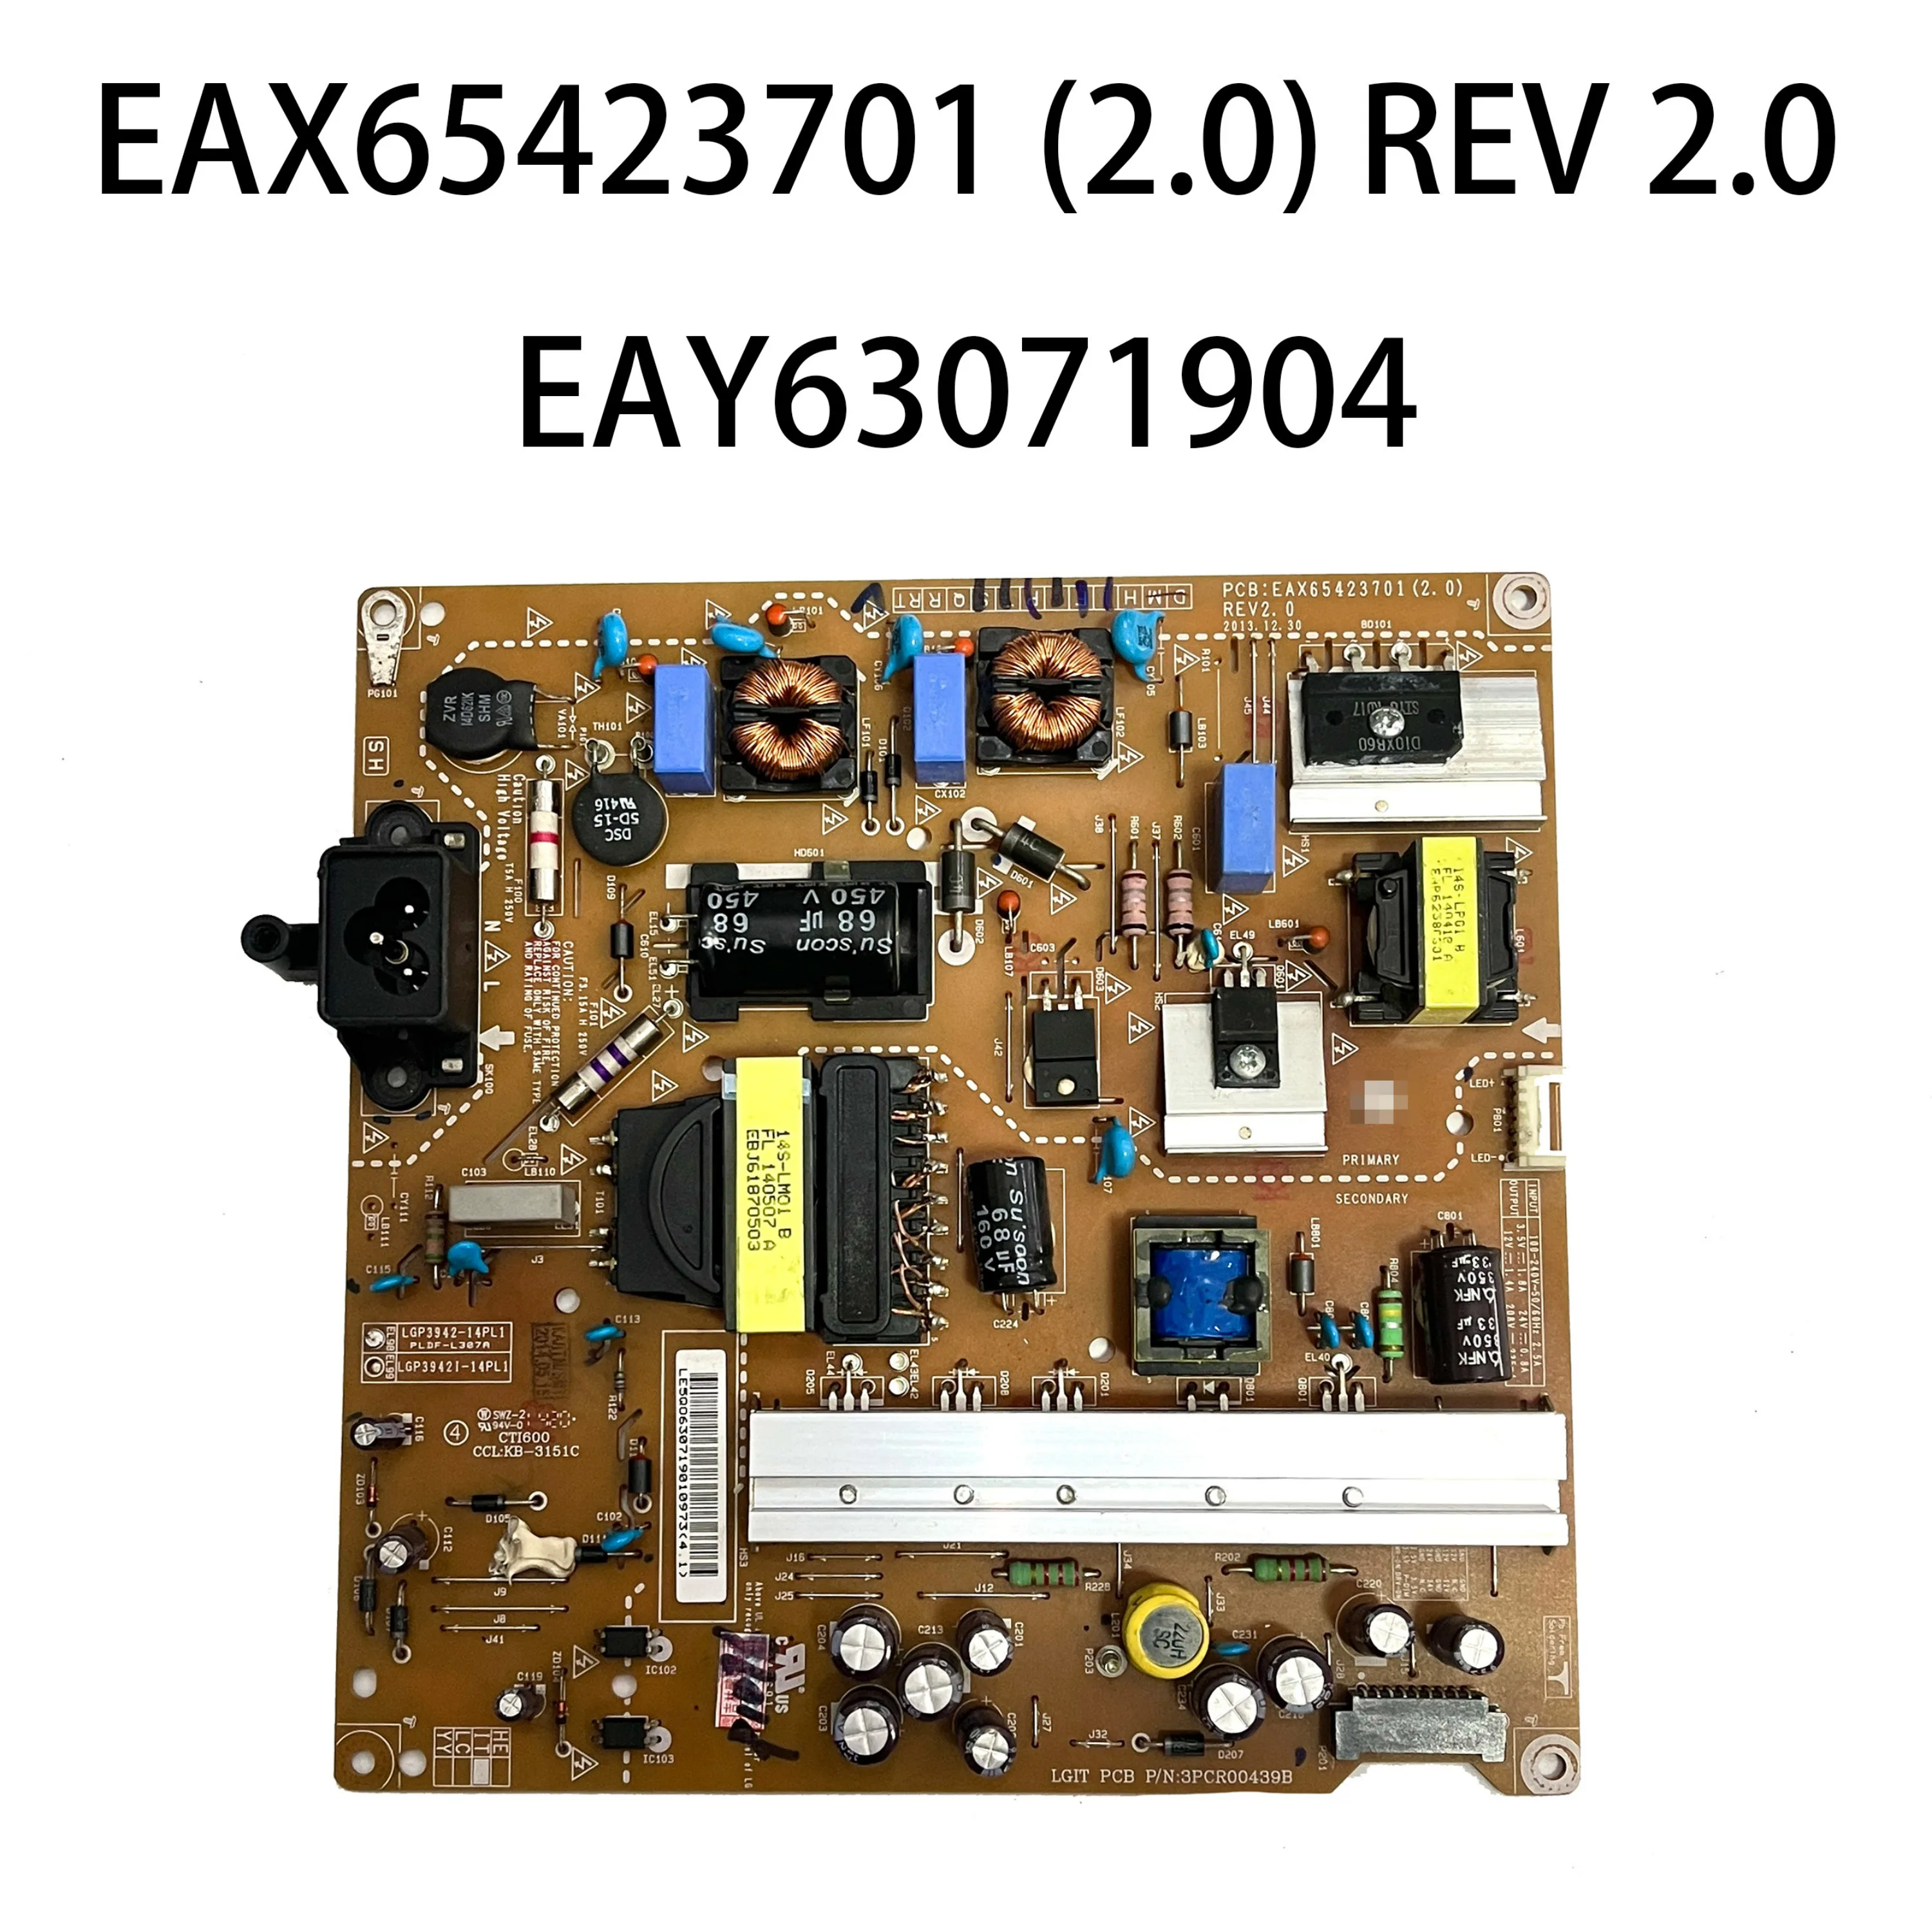 

Authentic Original TV Power Board EAX65423701 (2.0) REV 2.0 EAY63071904 LGP3942-14PL1 Works Normally And is for 39LY560-UA Parts